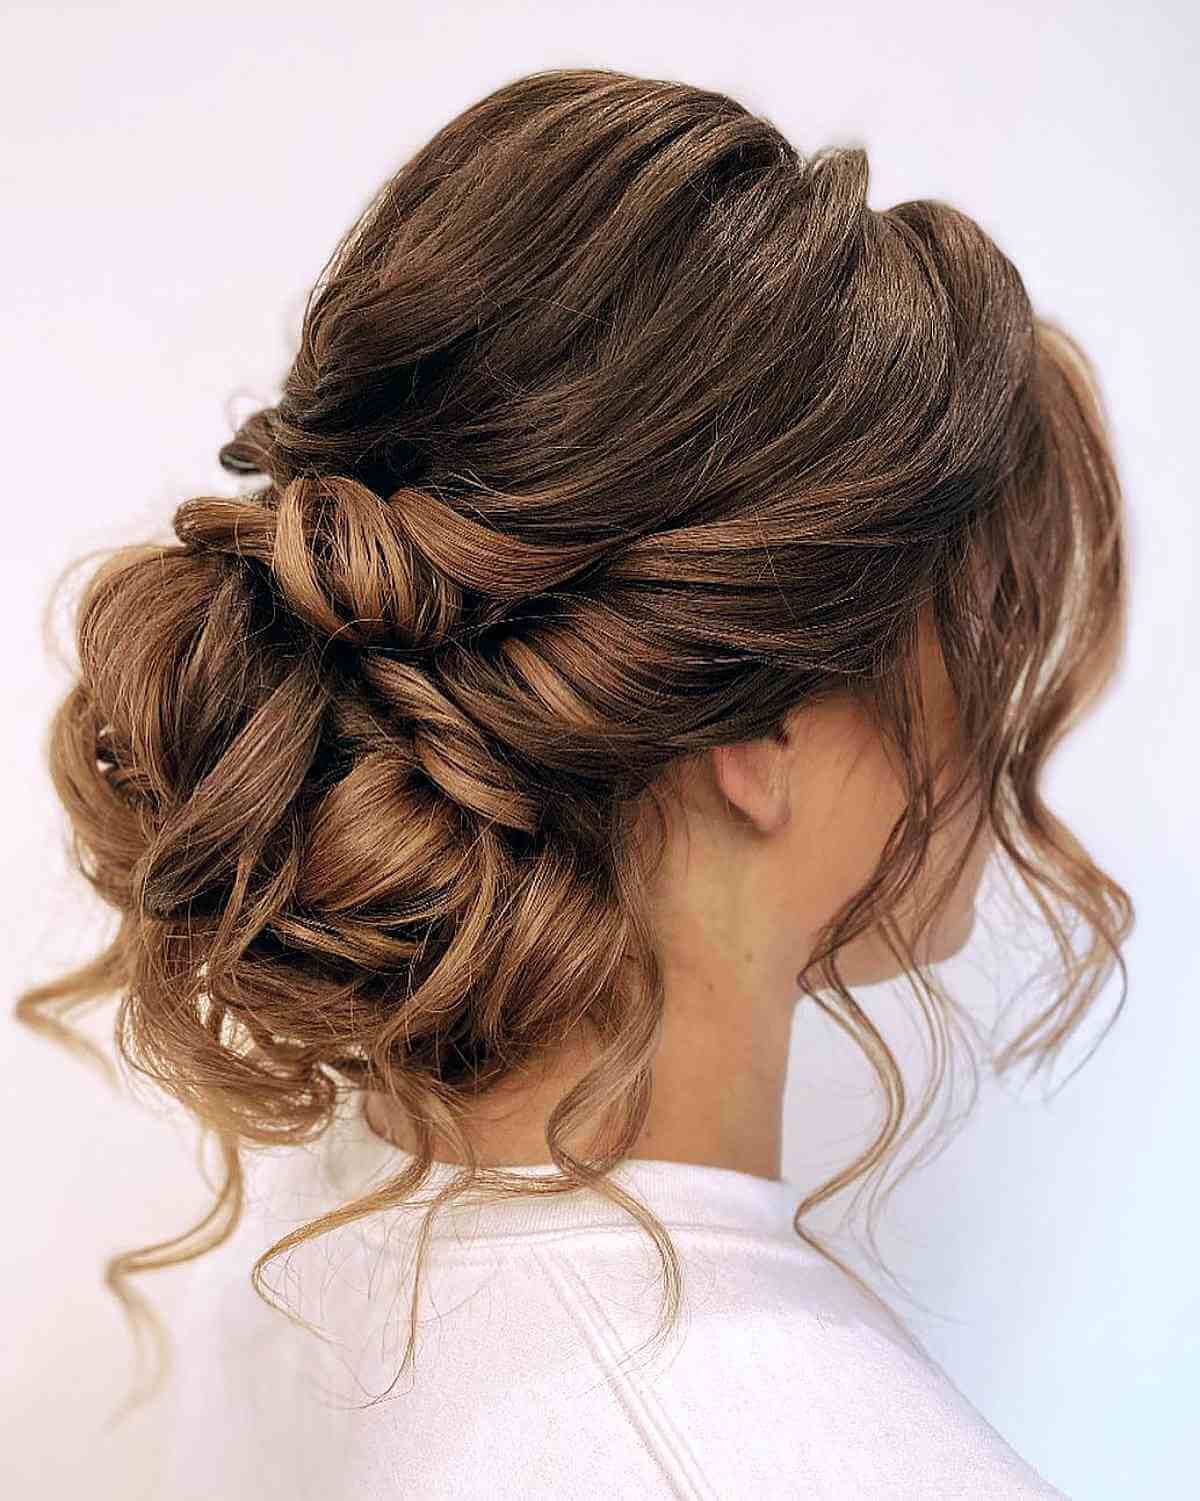 Updo hairstyle with loose curls